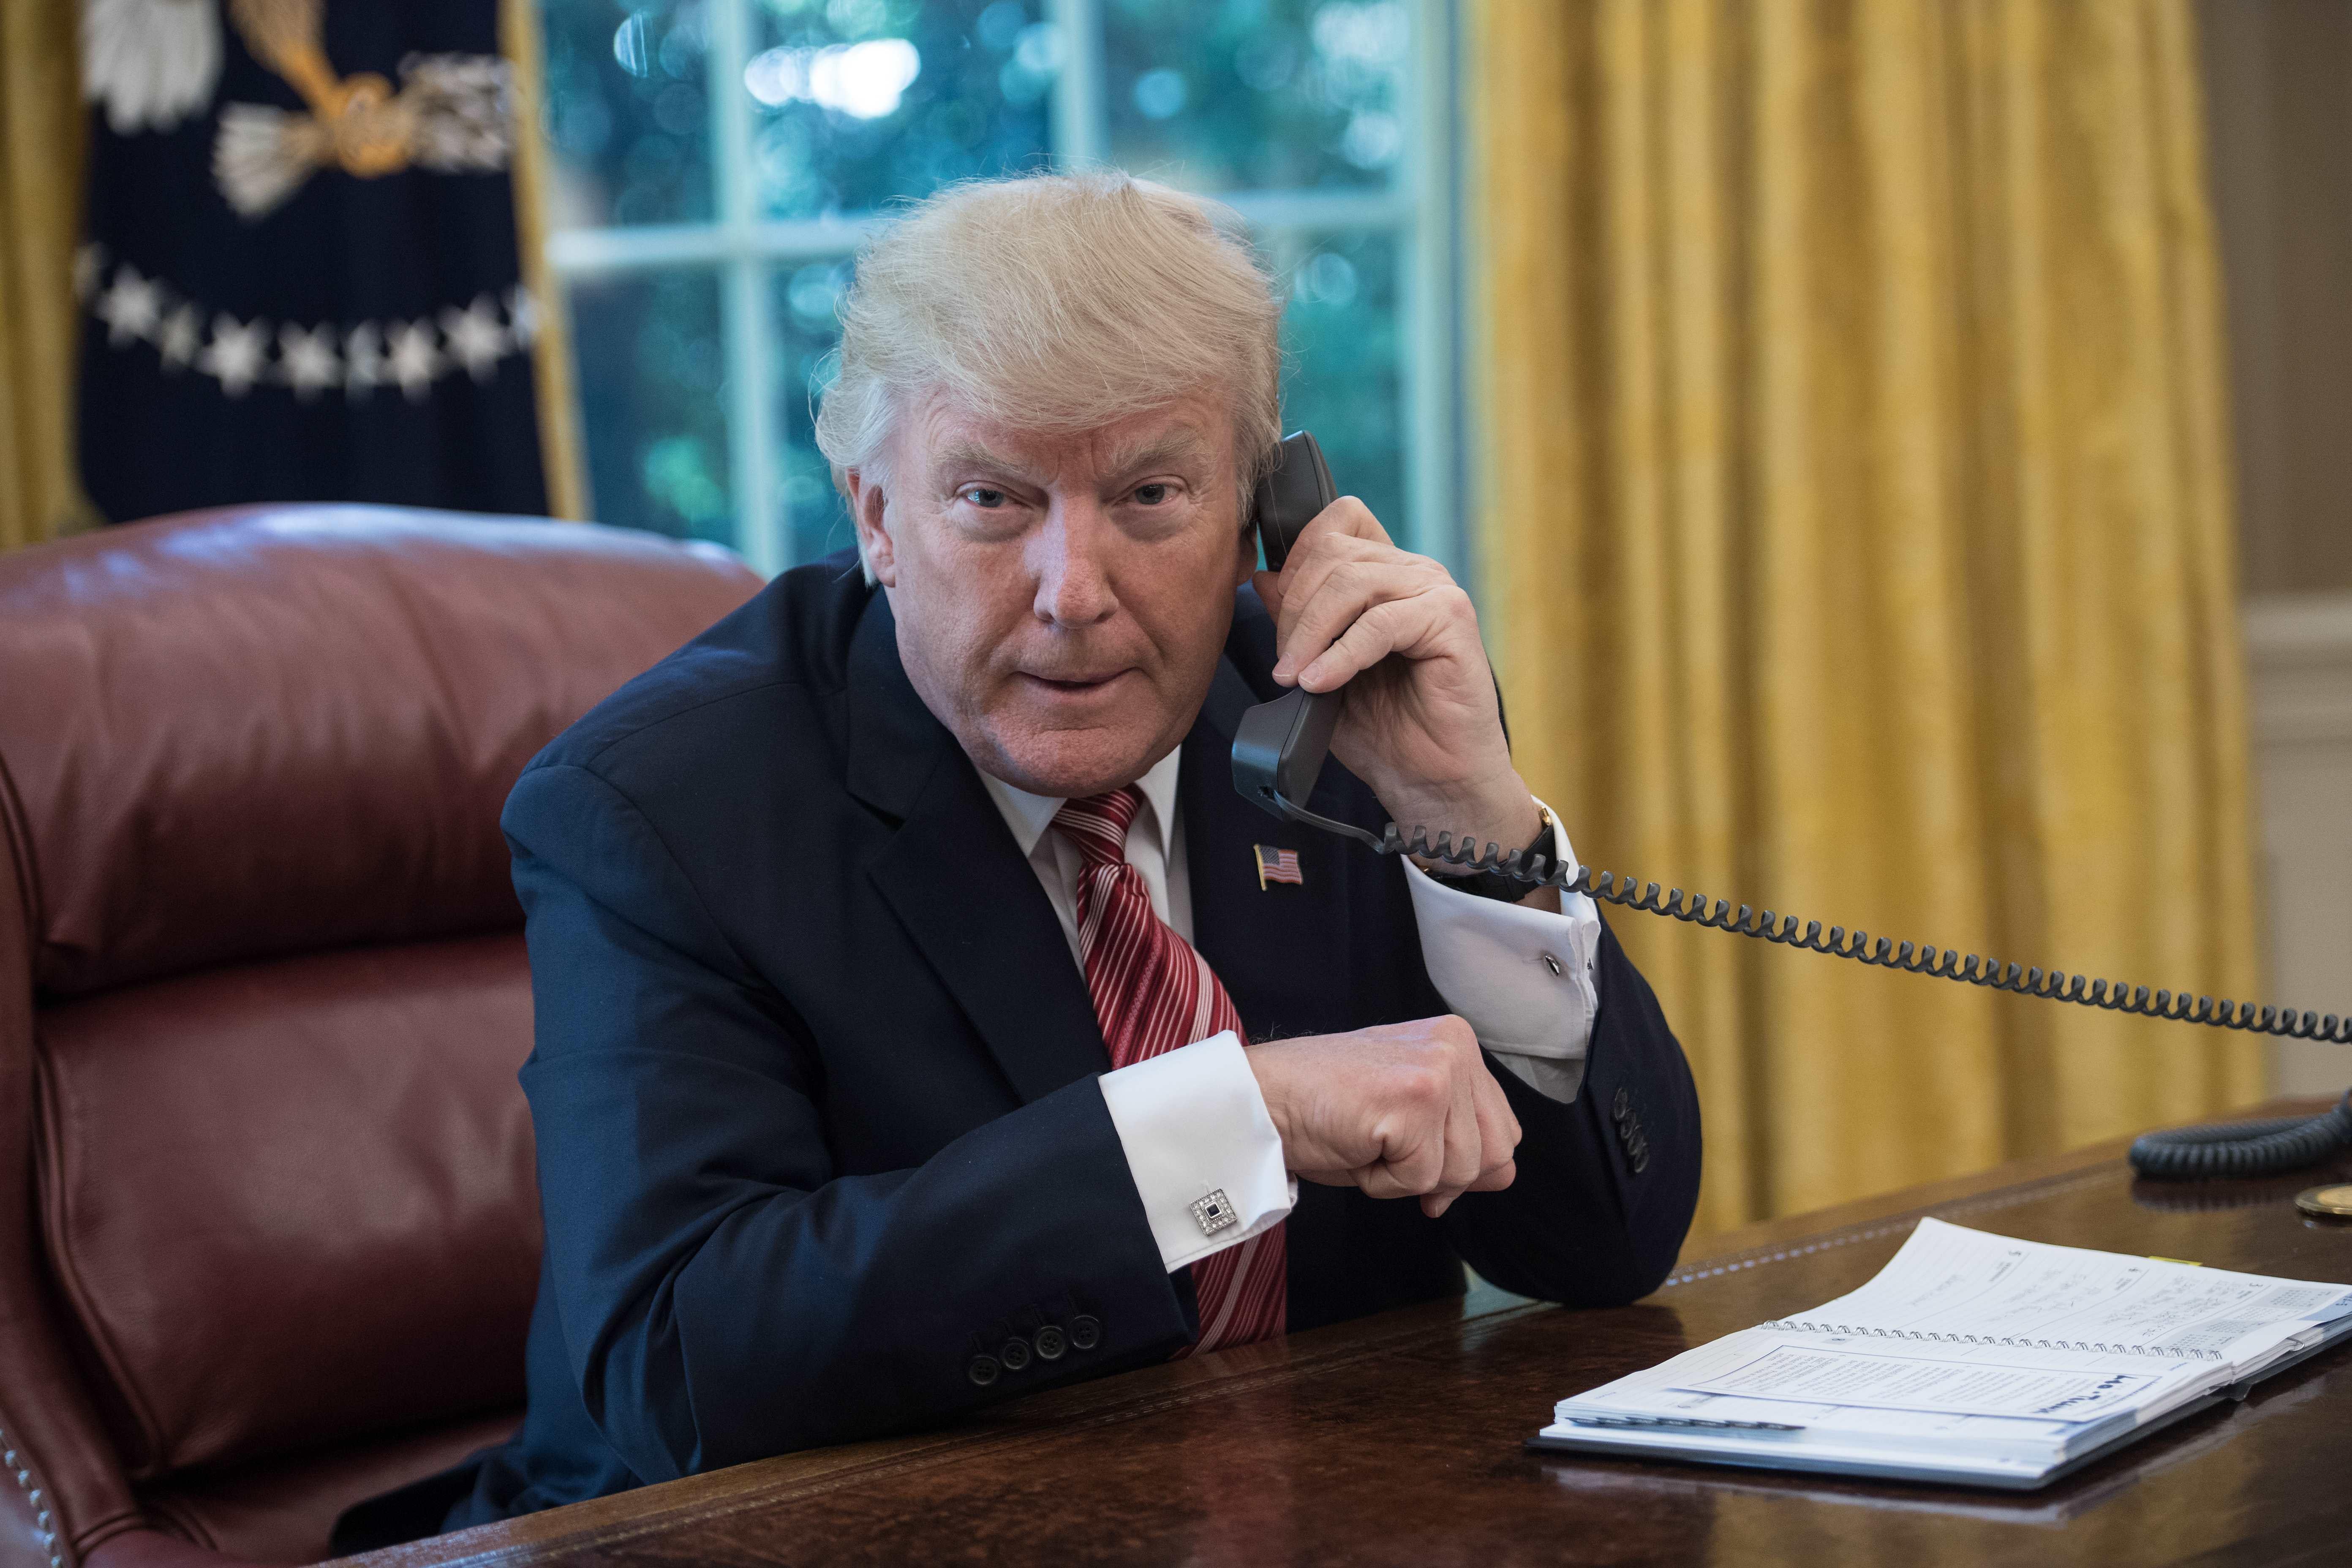 President Trump on the phone in the Oval Office at the White House in Washington, DC, on June 27, 2017.